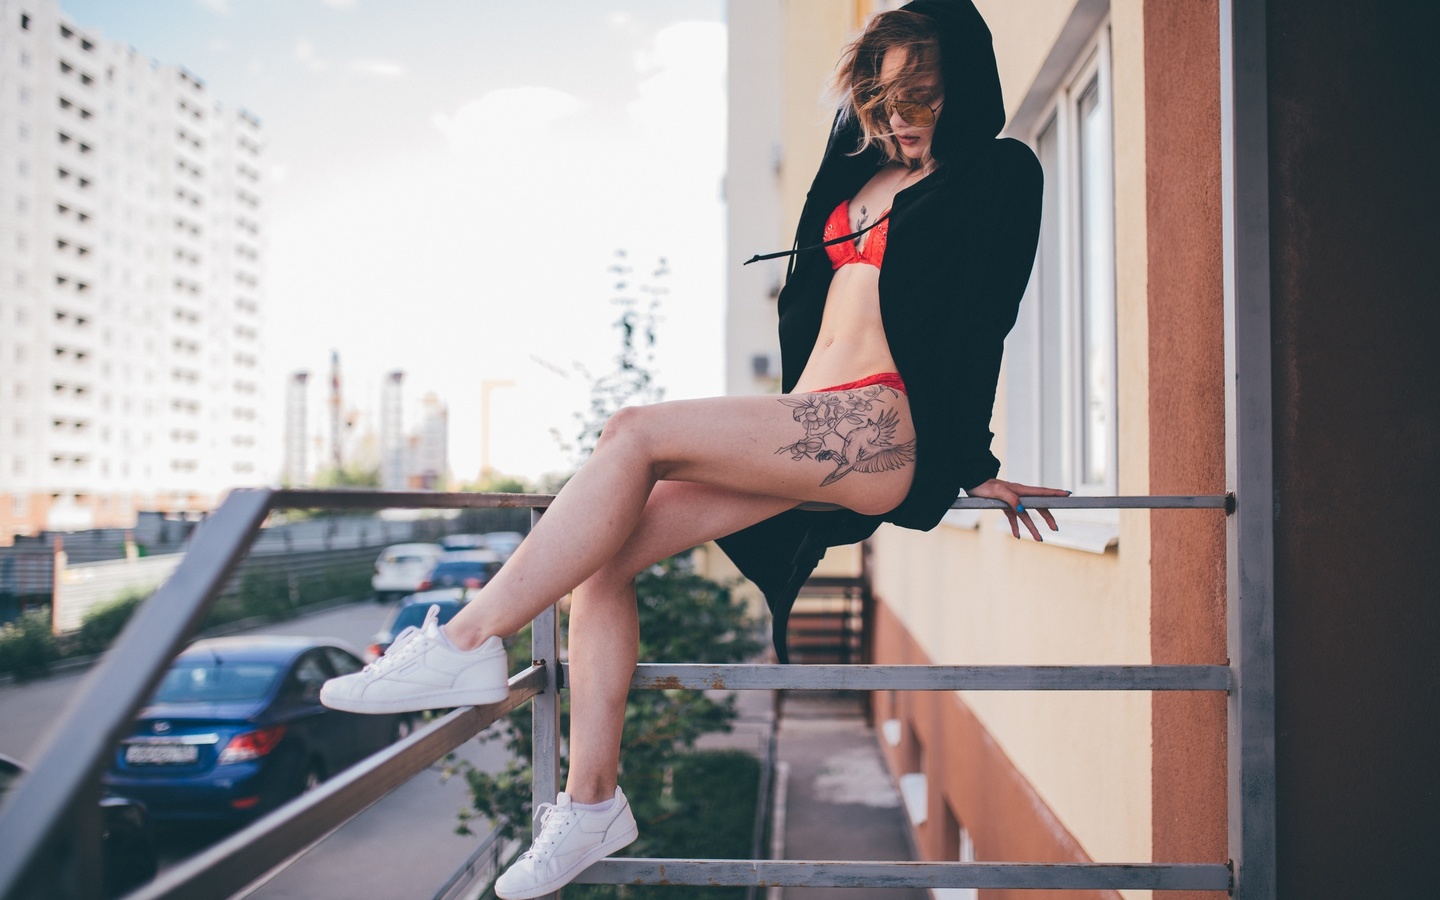 women, tattoo, black sweater, red lingerie, women outdoors, building, sneakers, ass, hoods, sunglasses, belly, sitting, painted nails